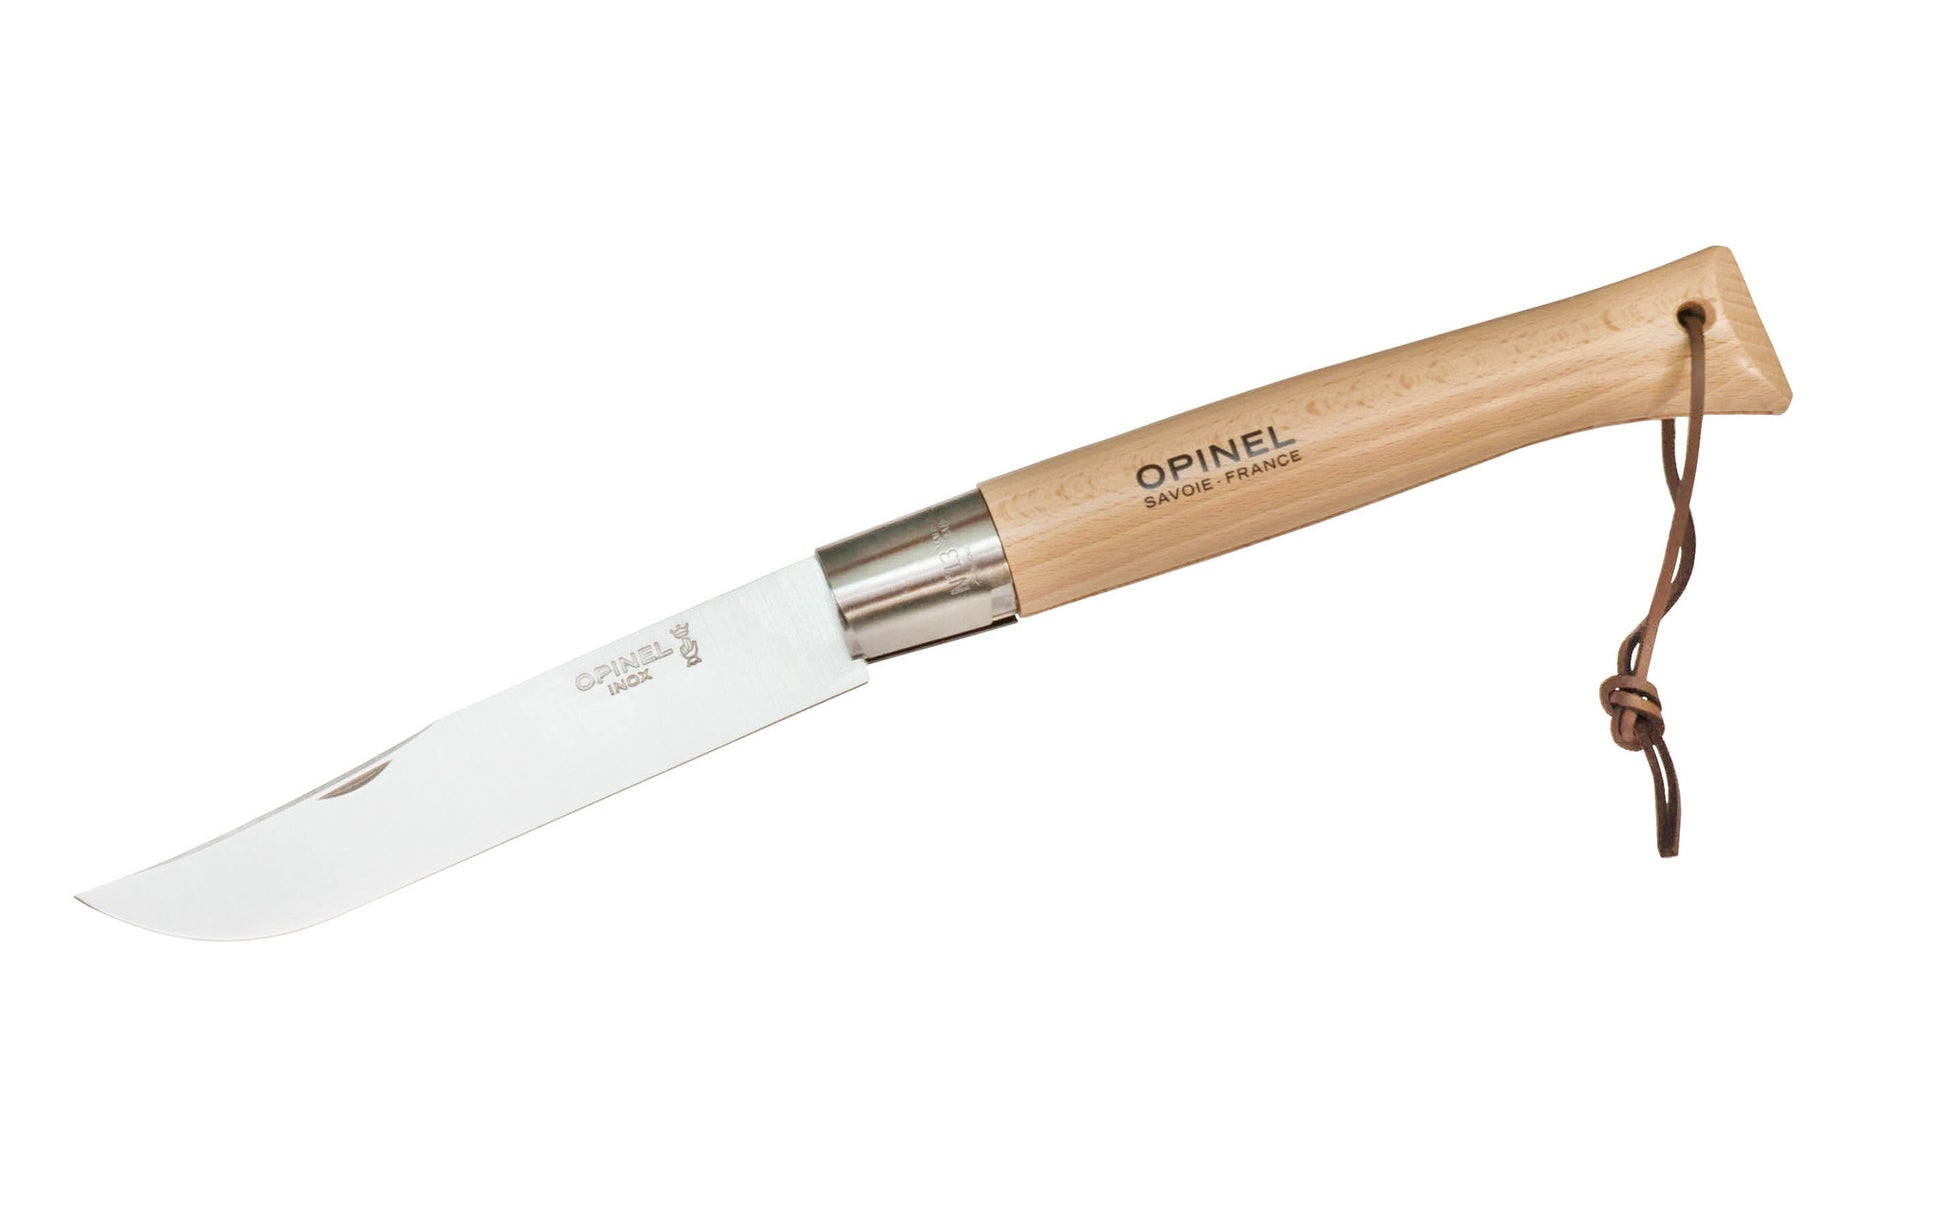 Giant Opinel Knife No. 13 Size ~ Made in France ~ Made of 12c27 Sandvik stainless steel ~ Foldable blade with stainless locking collar ~ Great for large barbecue meats & grilling ~ Genuine Beech Handle